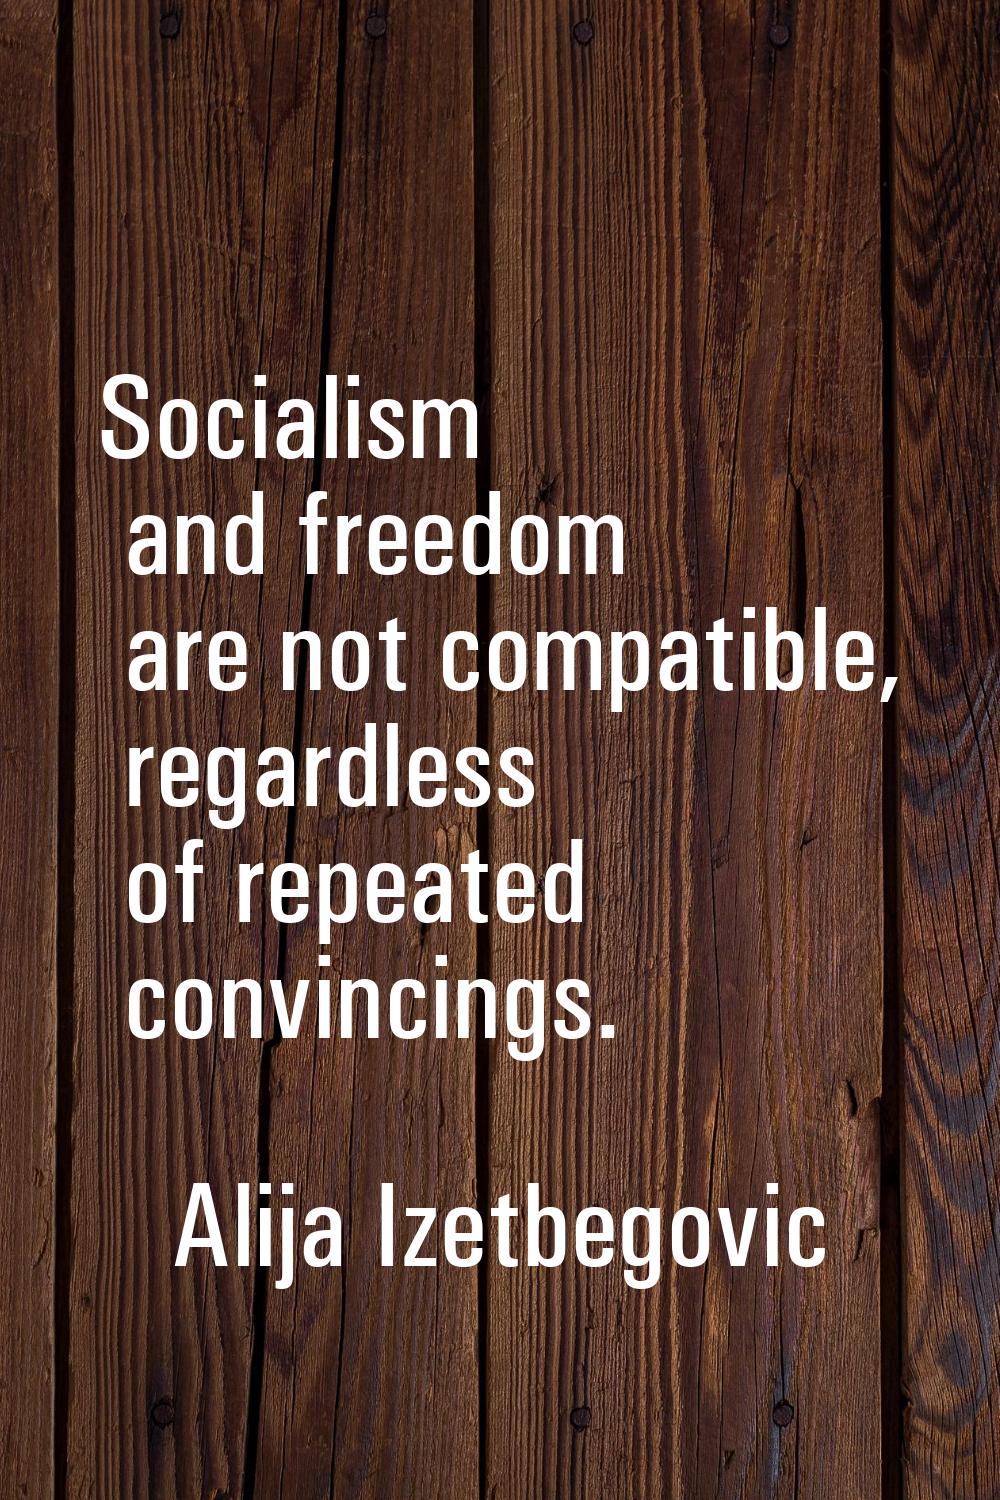 Socialism and freedom are not compatible, regardless of repeated convincings.